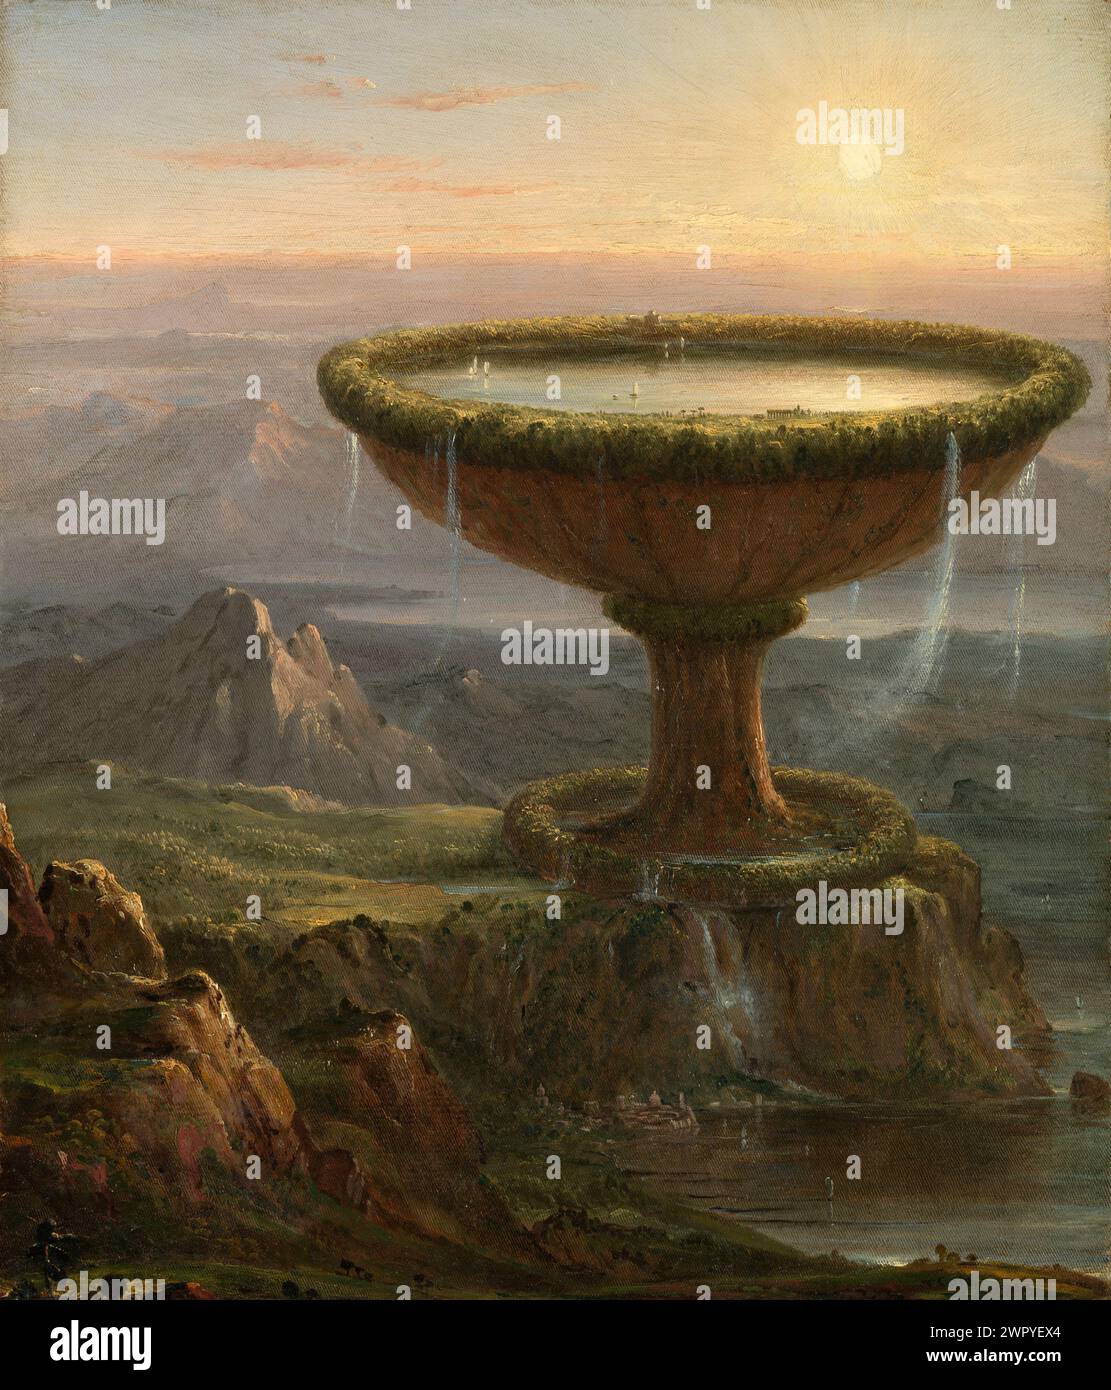 Oil painting by American artist Thomas Cole, founder of the Hudson River School of art, The Titan's Goblet ca. 1833 Stock Photo